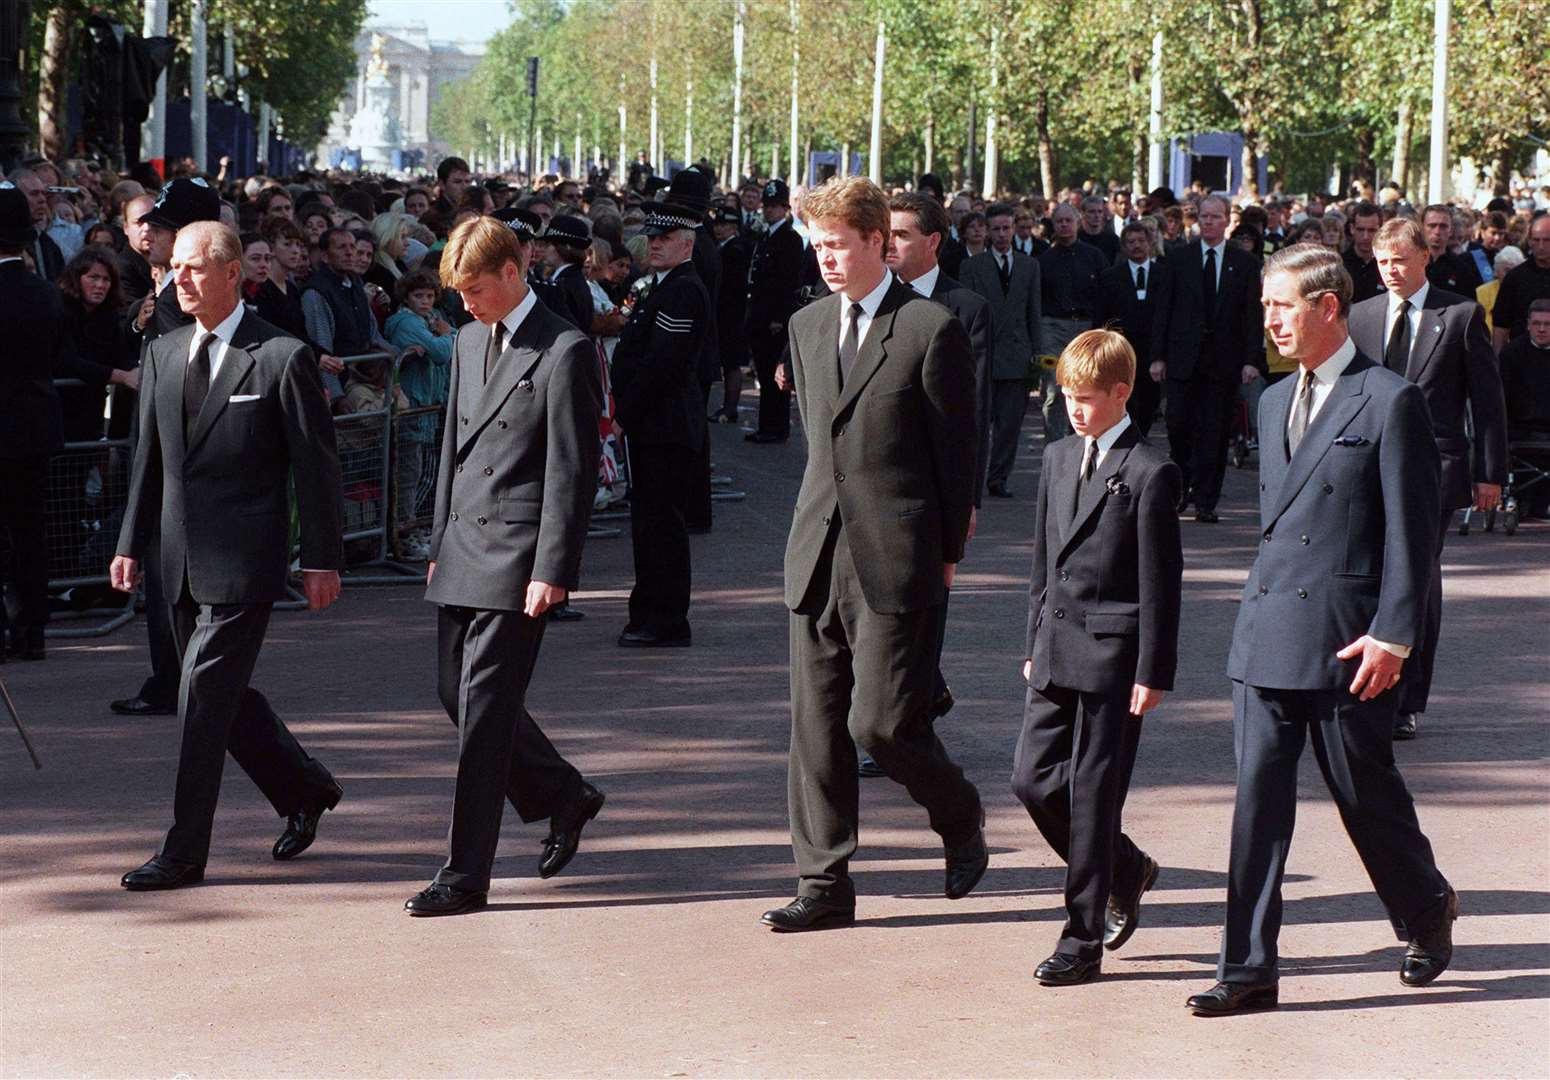 From left to right: The Duke of Edinburgh, Prince William, Earl Spencer, Prince Harry and the Prince of Wales as they follow Diana’s coffin to Westminster Abbey (Tony Harris/PA)